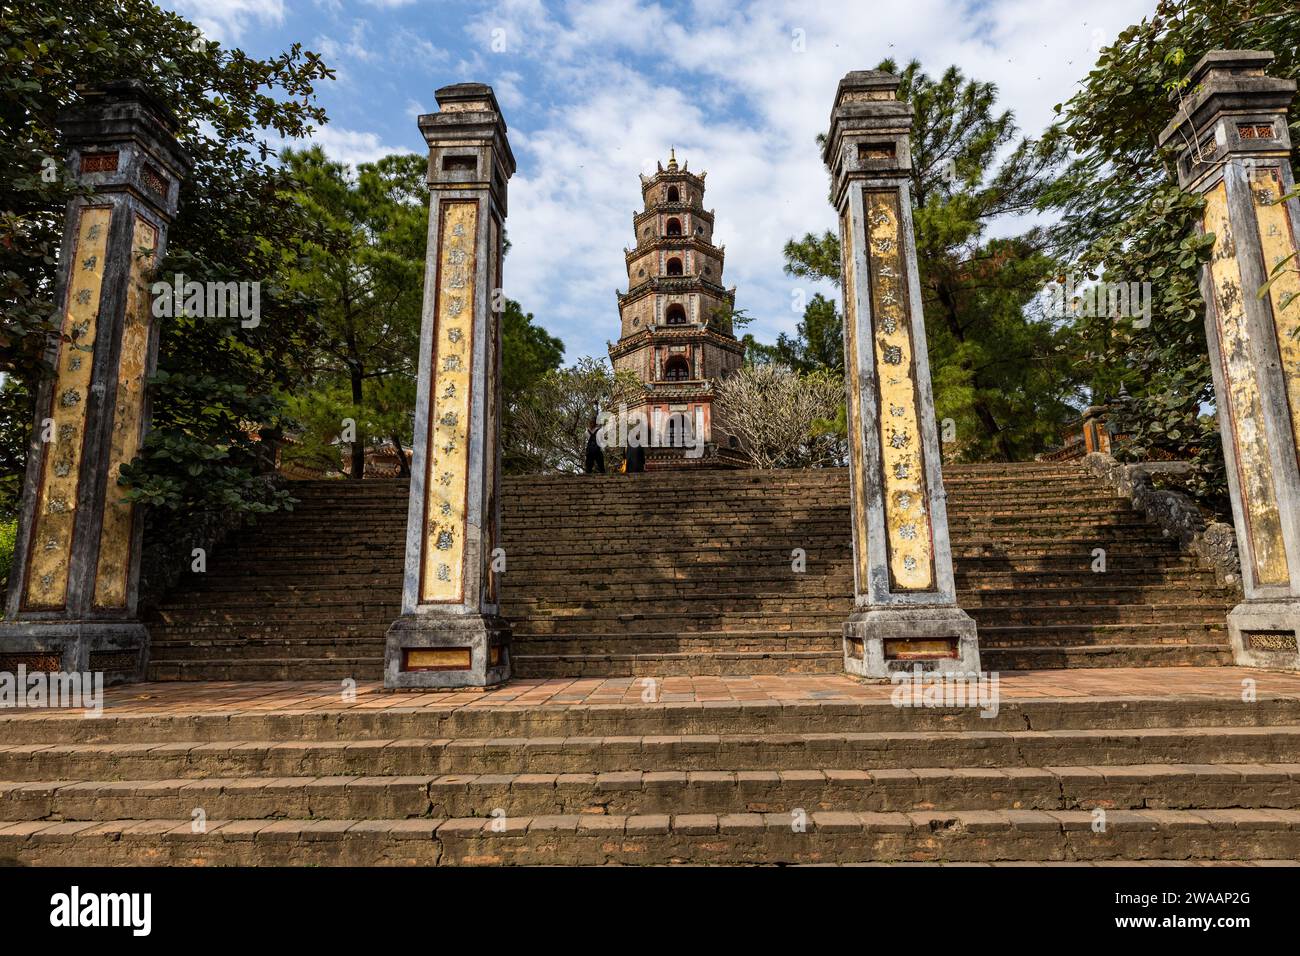 The old Pagoda of Hue in Vietnam Stock Photo